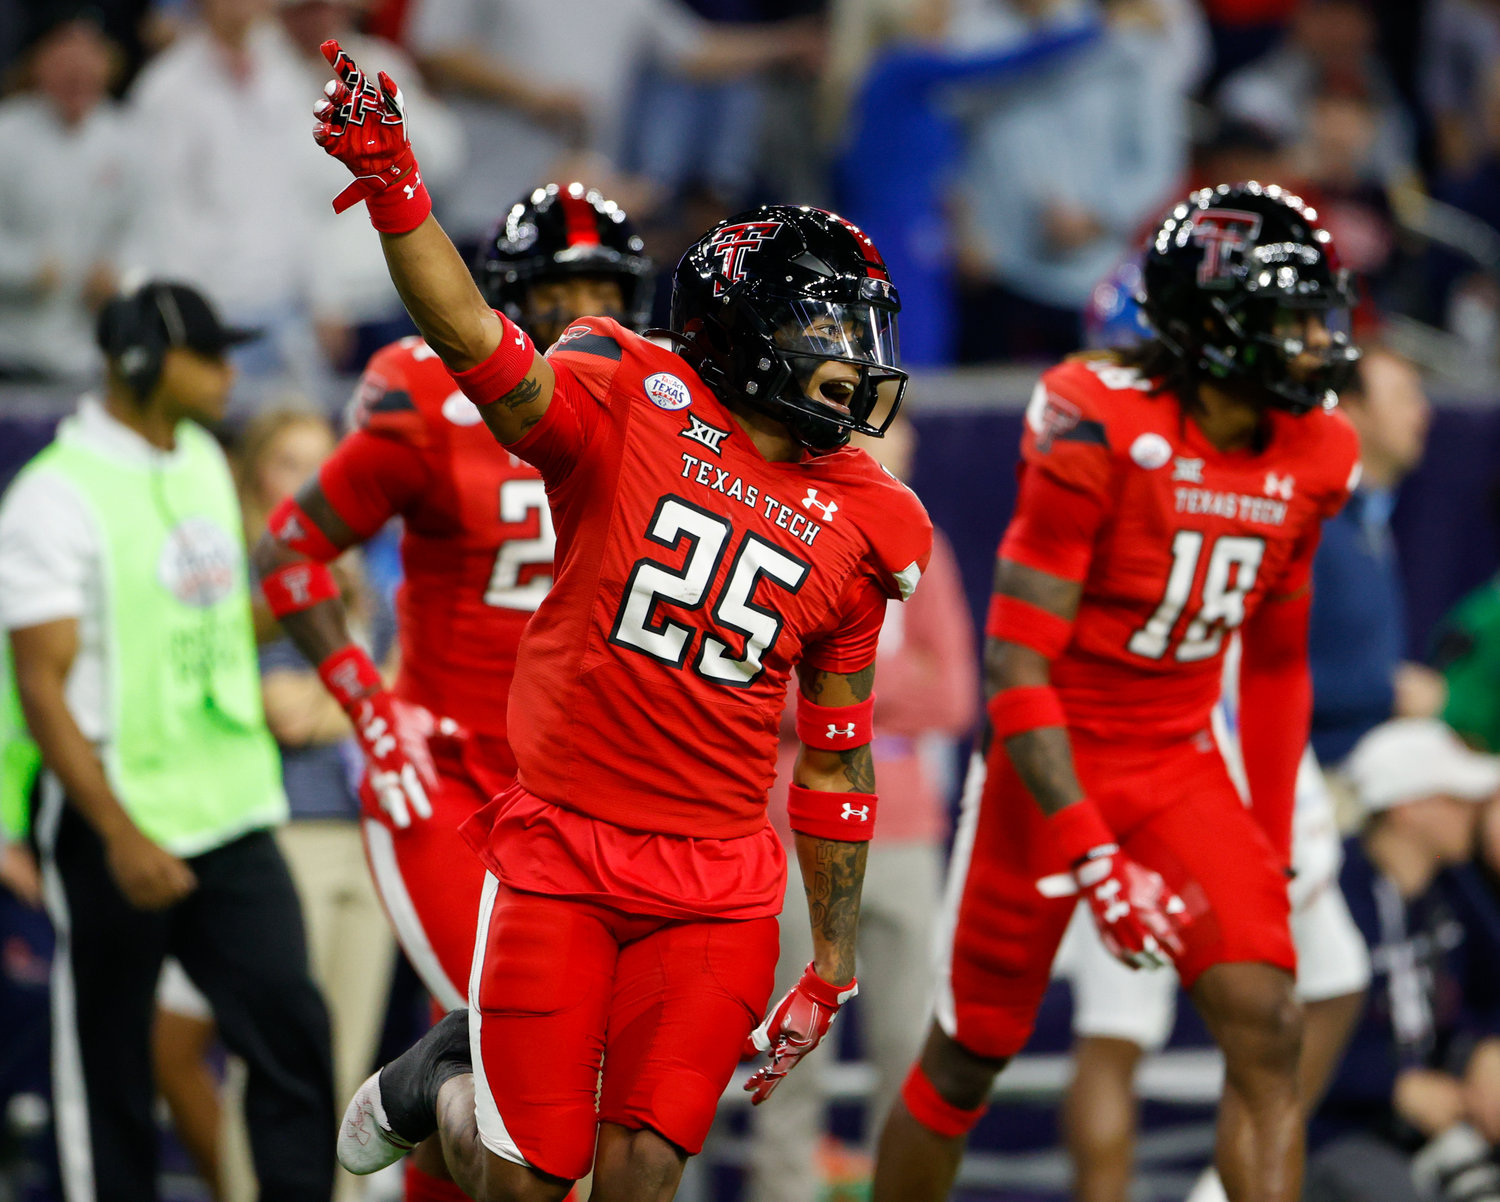 Texas Tech defensive back Dadrion Taylor-Demerson (25) celebrates after a defensive stop on fourth down during the TaxAct Texas Bowl on Dec. 28, 2022 in Houston.